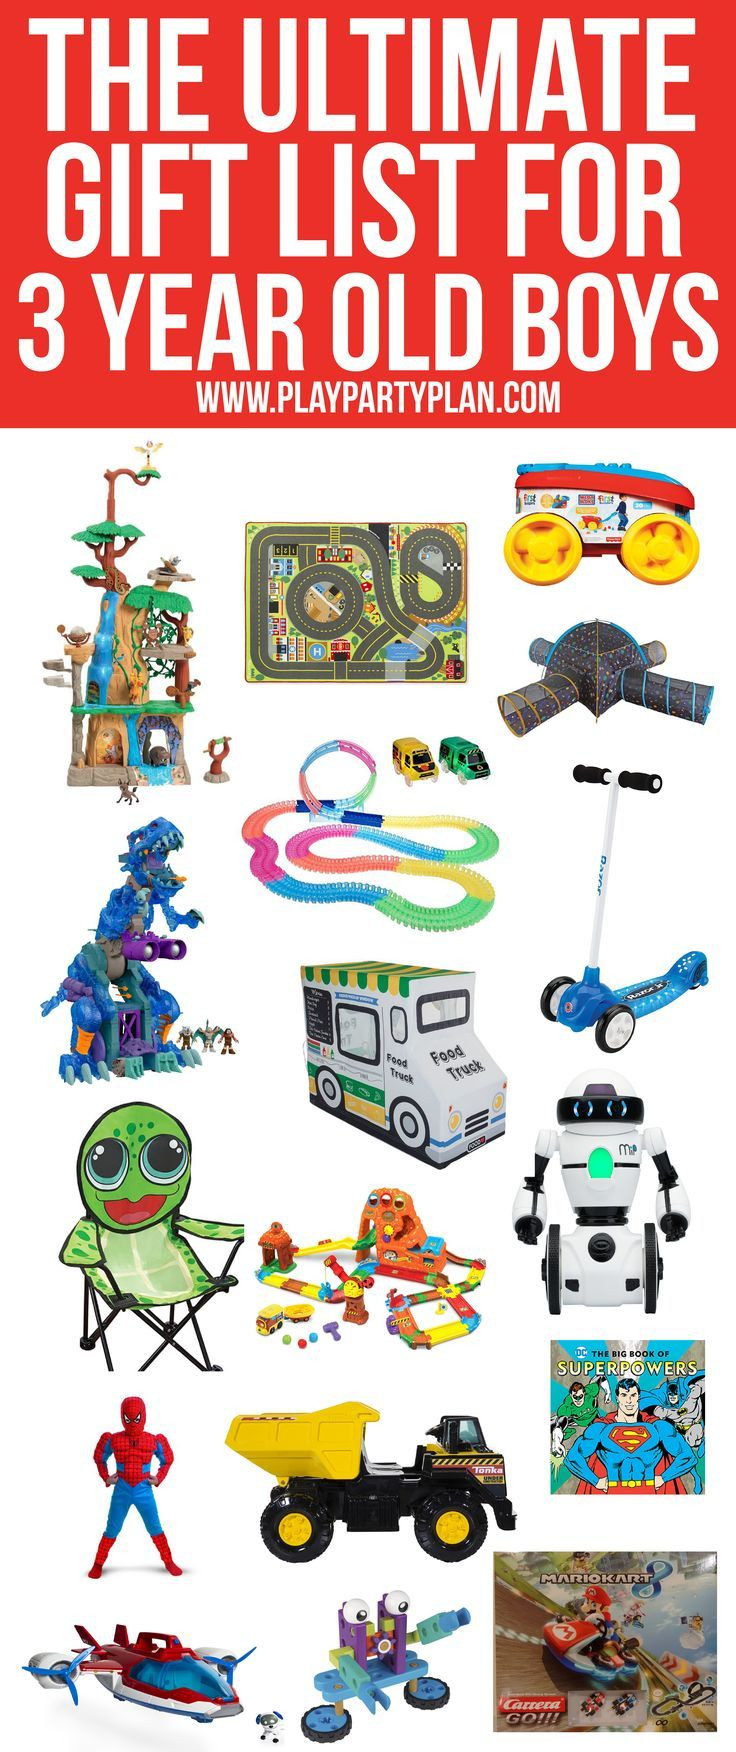 3 Year Old Boy Birthday Gifts
 25 Amazing Gifts & Toys for 3 Year Olds Who Have